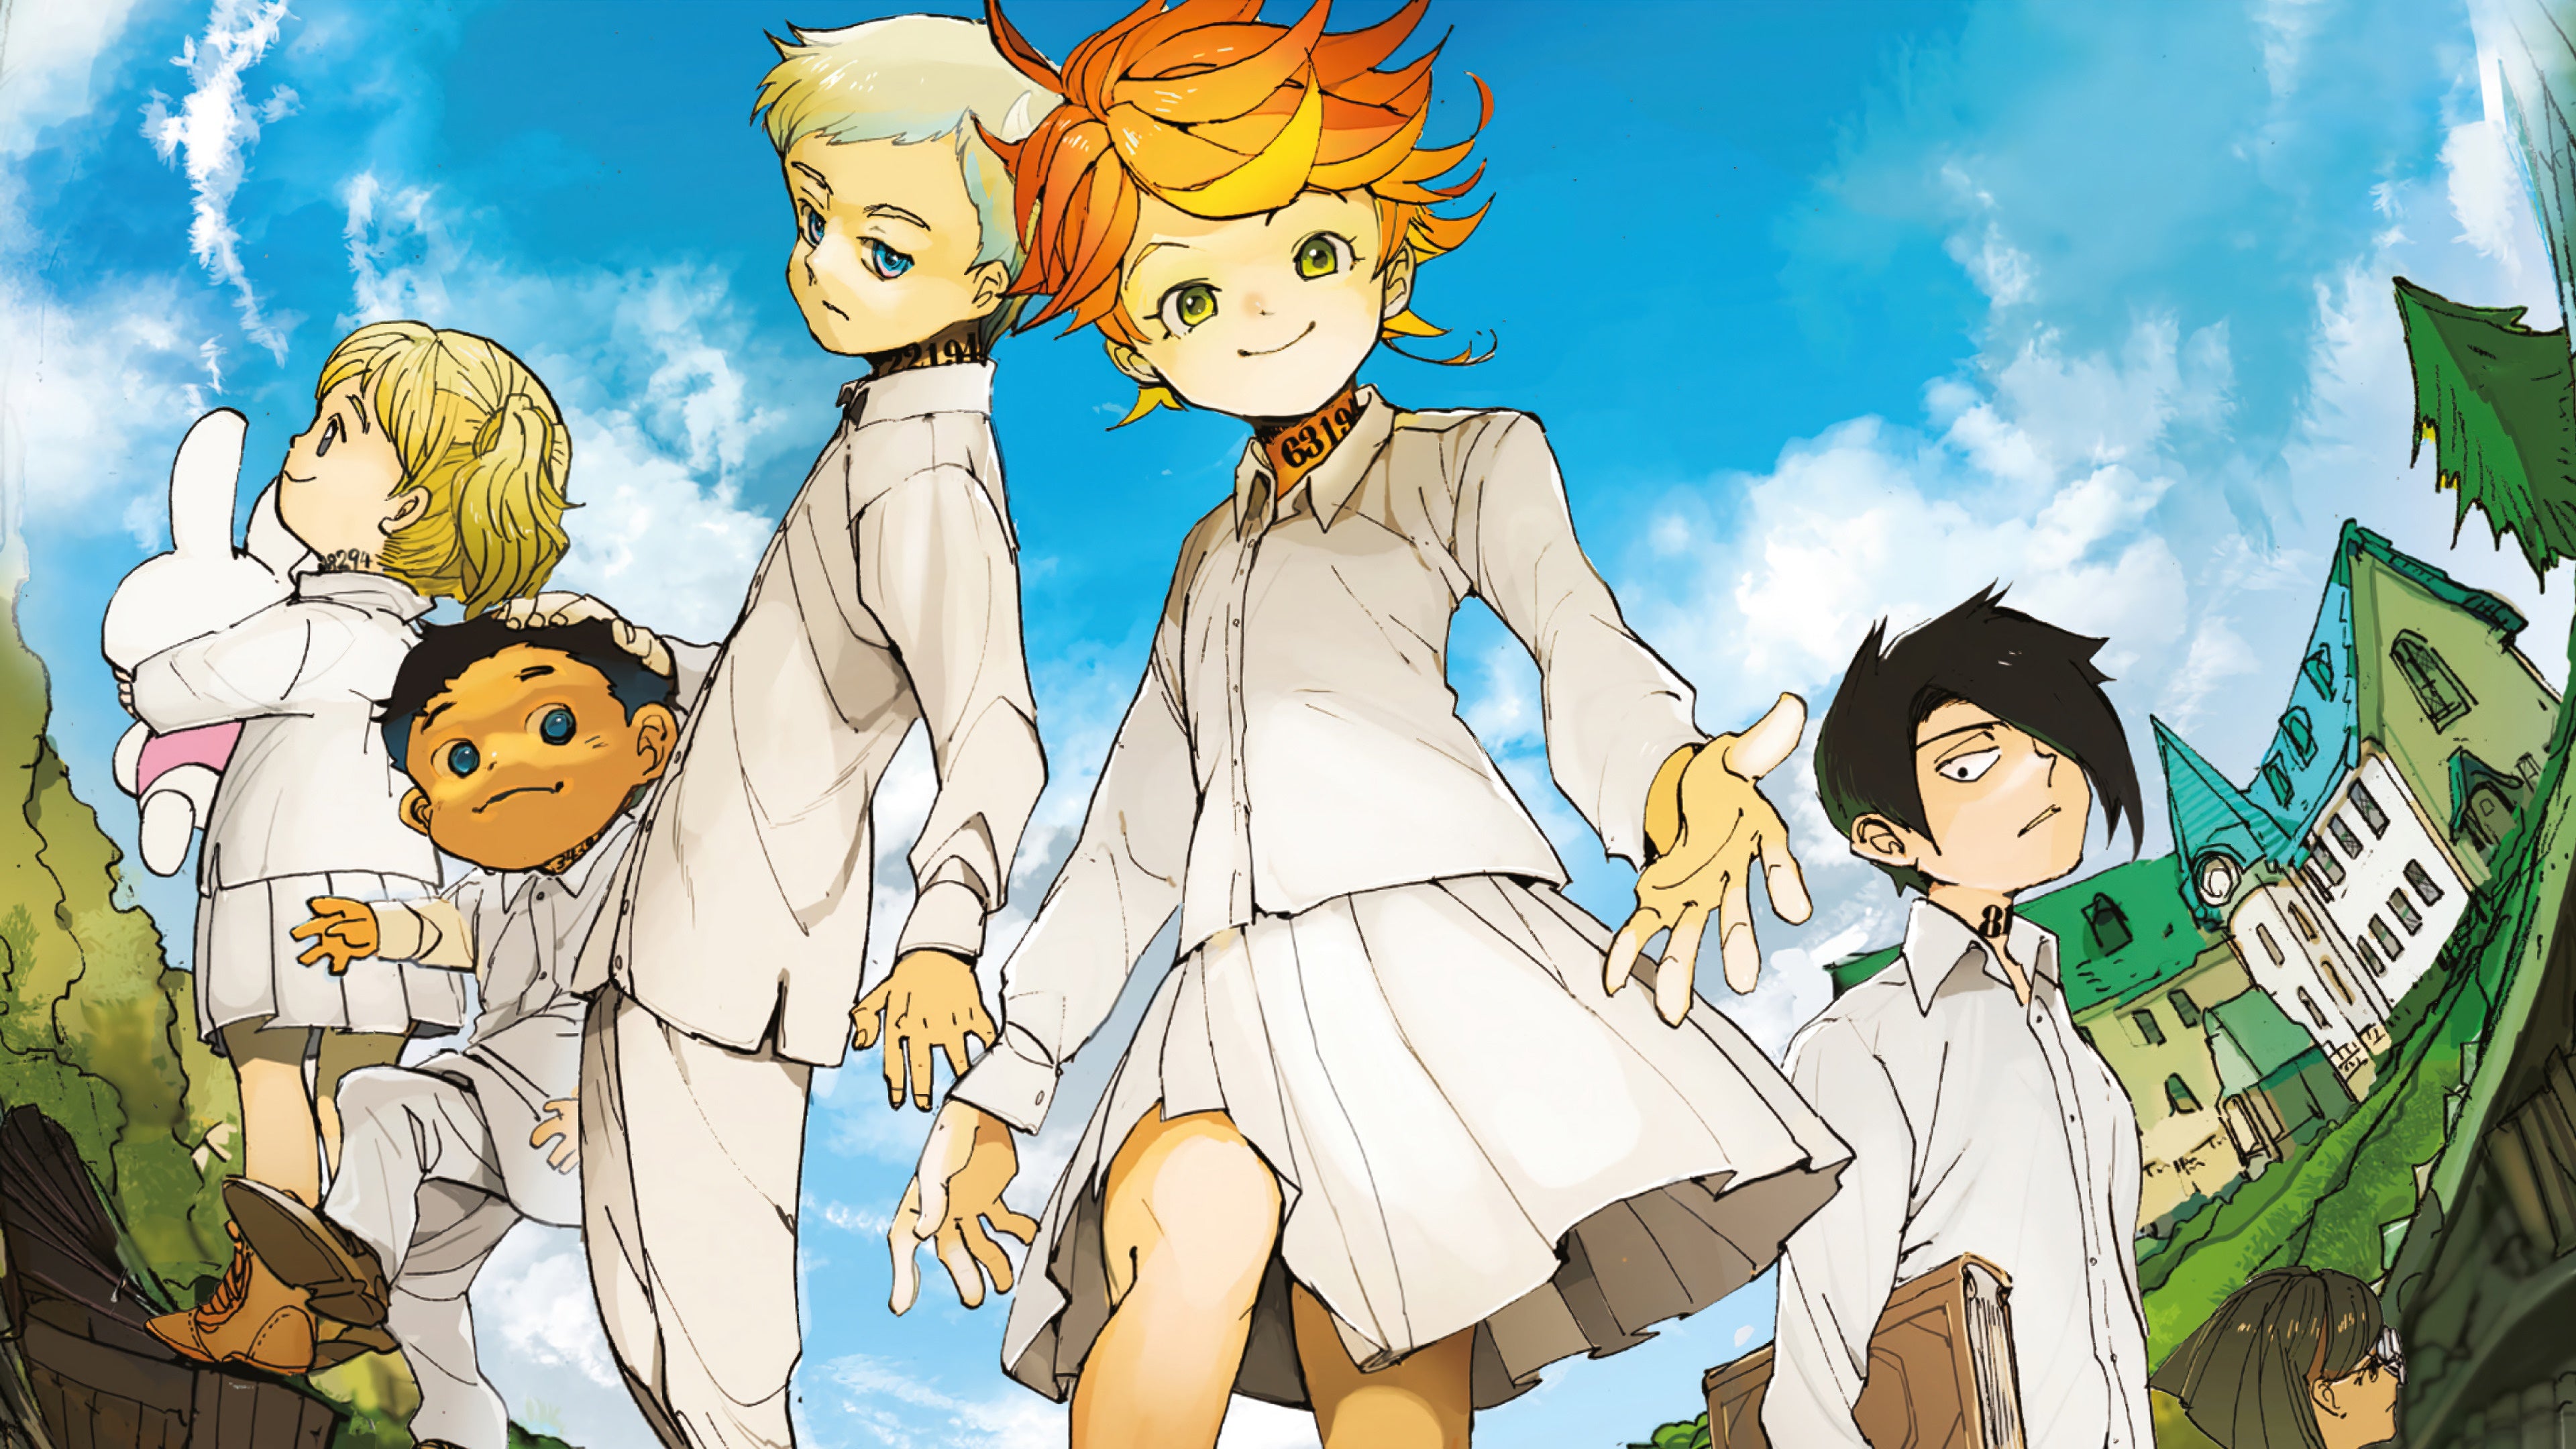 The Promised Neverland on X: The Promised Neverland Vol. 15 Cover   / X